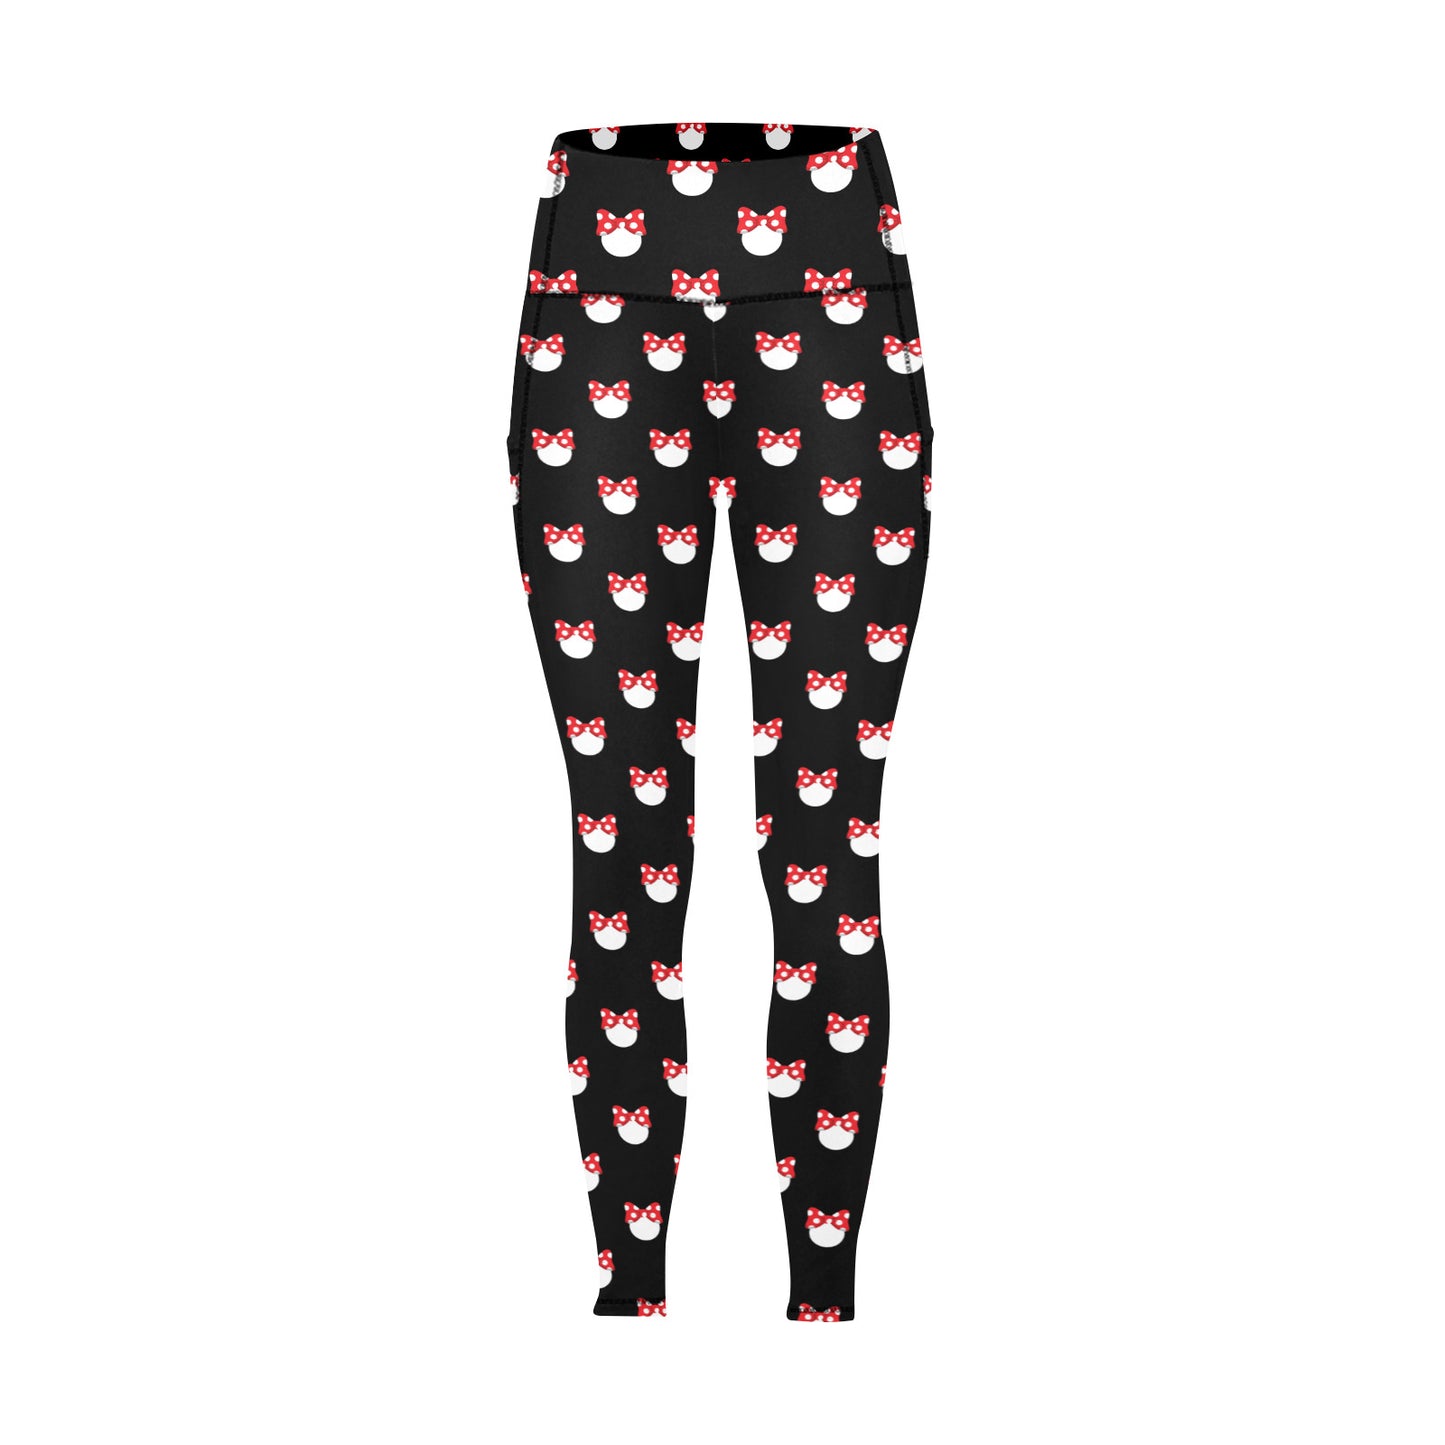 White Polka Dot Red Bow Women's Athletic Leggings With Pockets